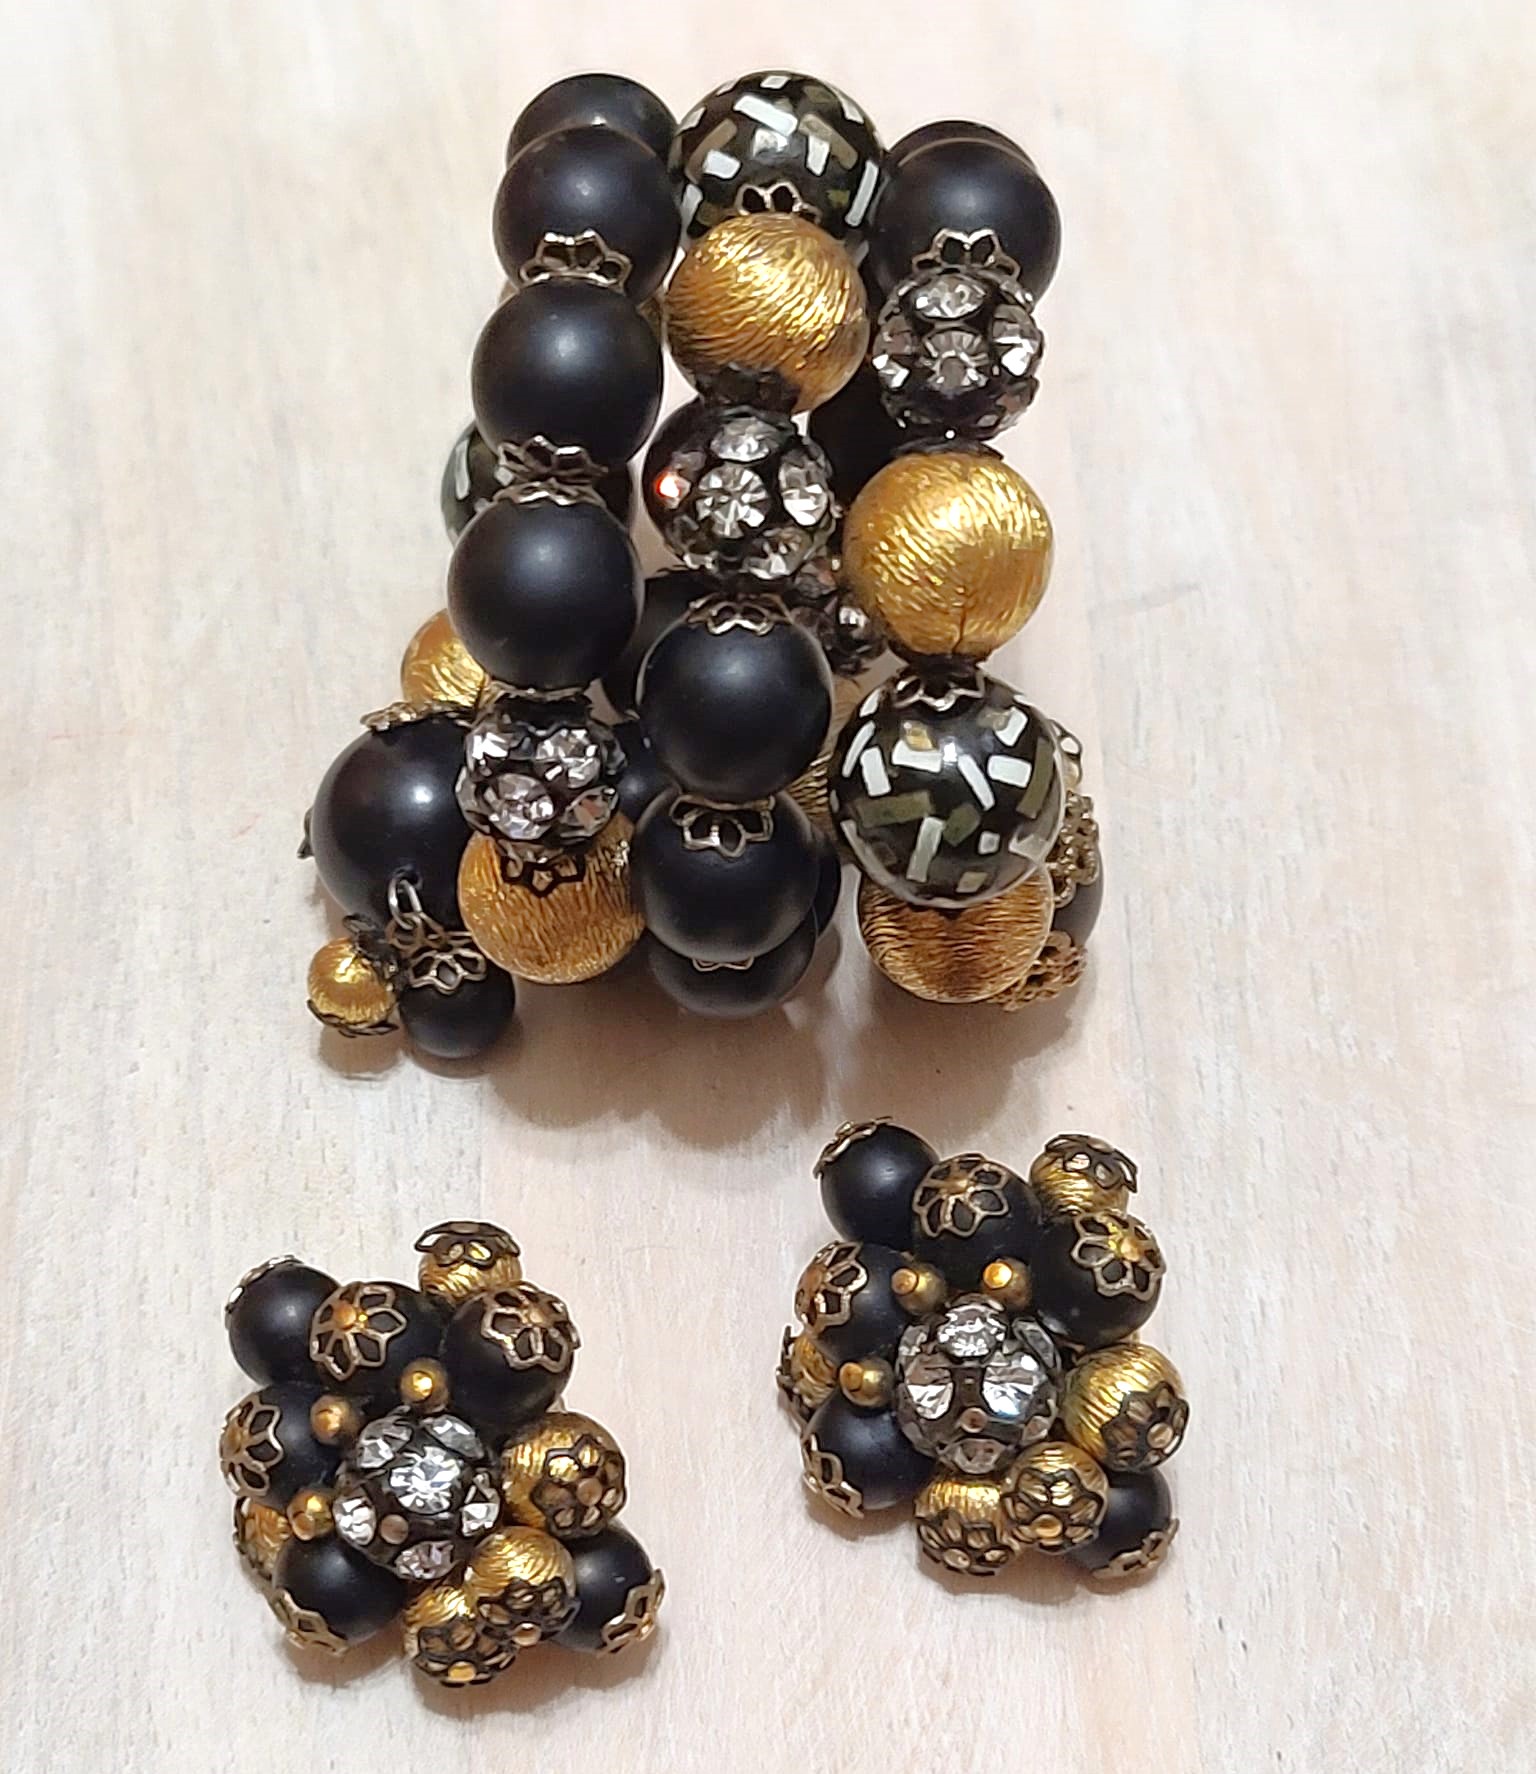 Designer Hobe rhinestone and bead memory wire bracelet and clip on earrings black,confetti,gold